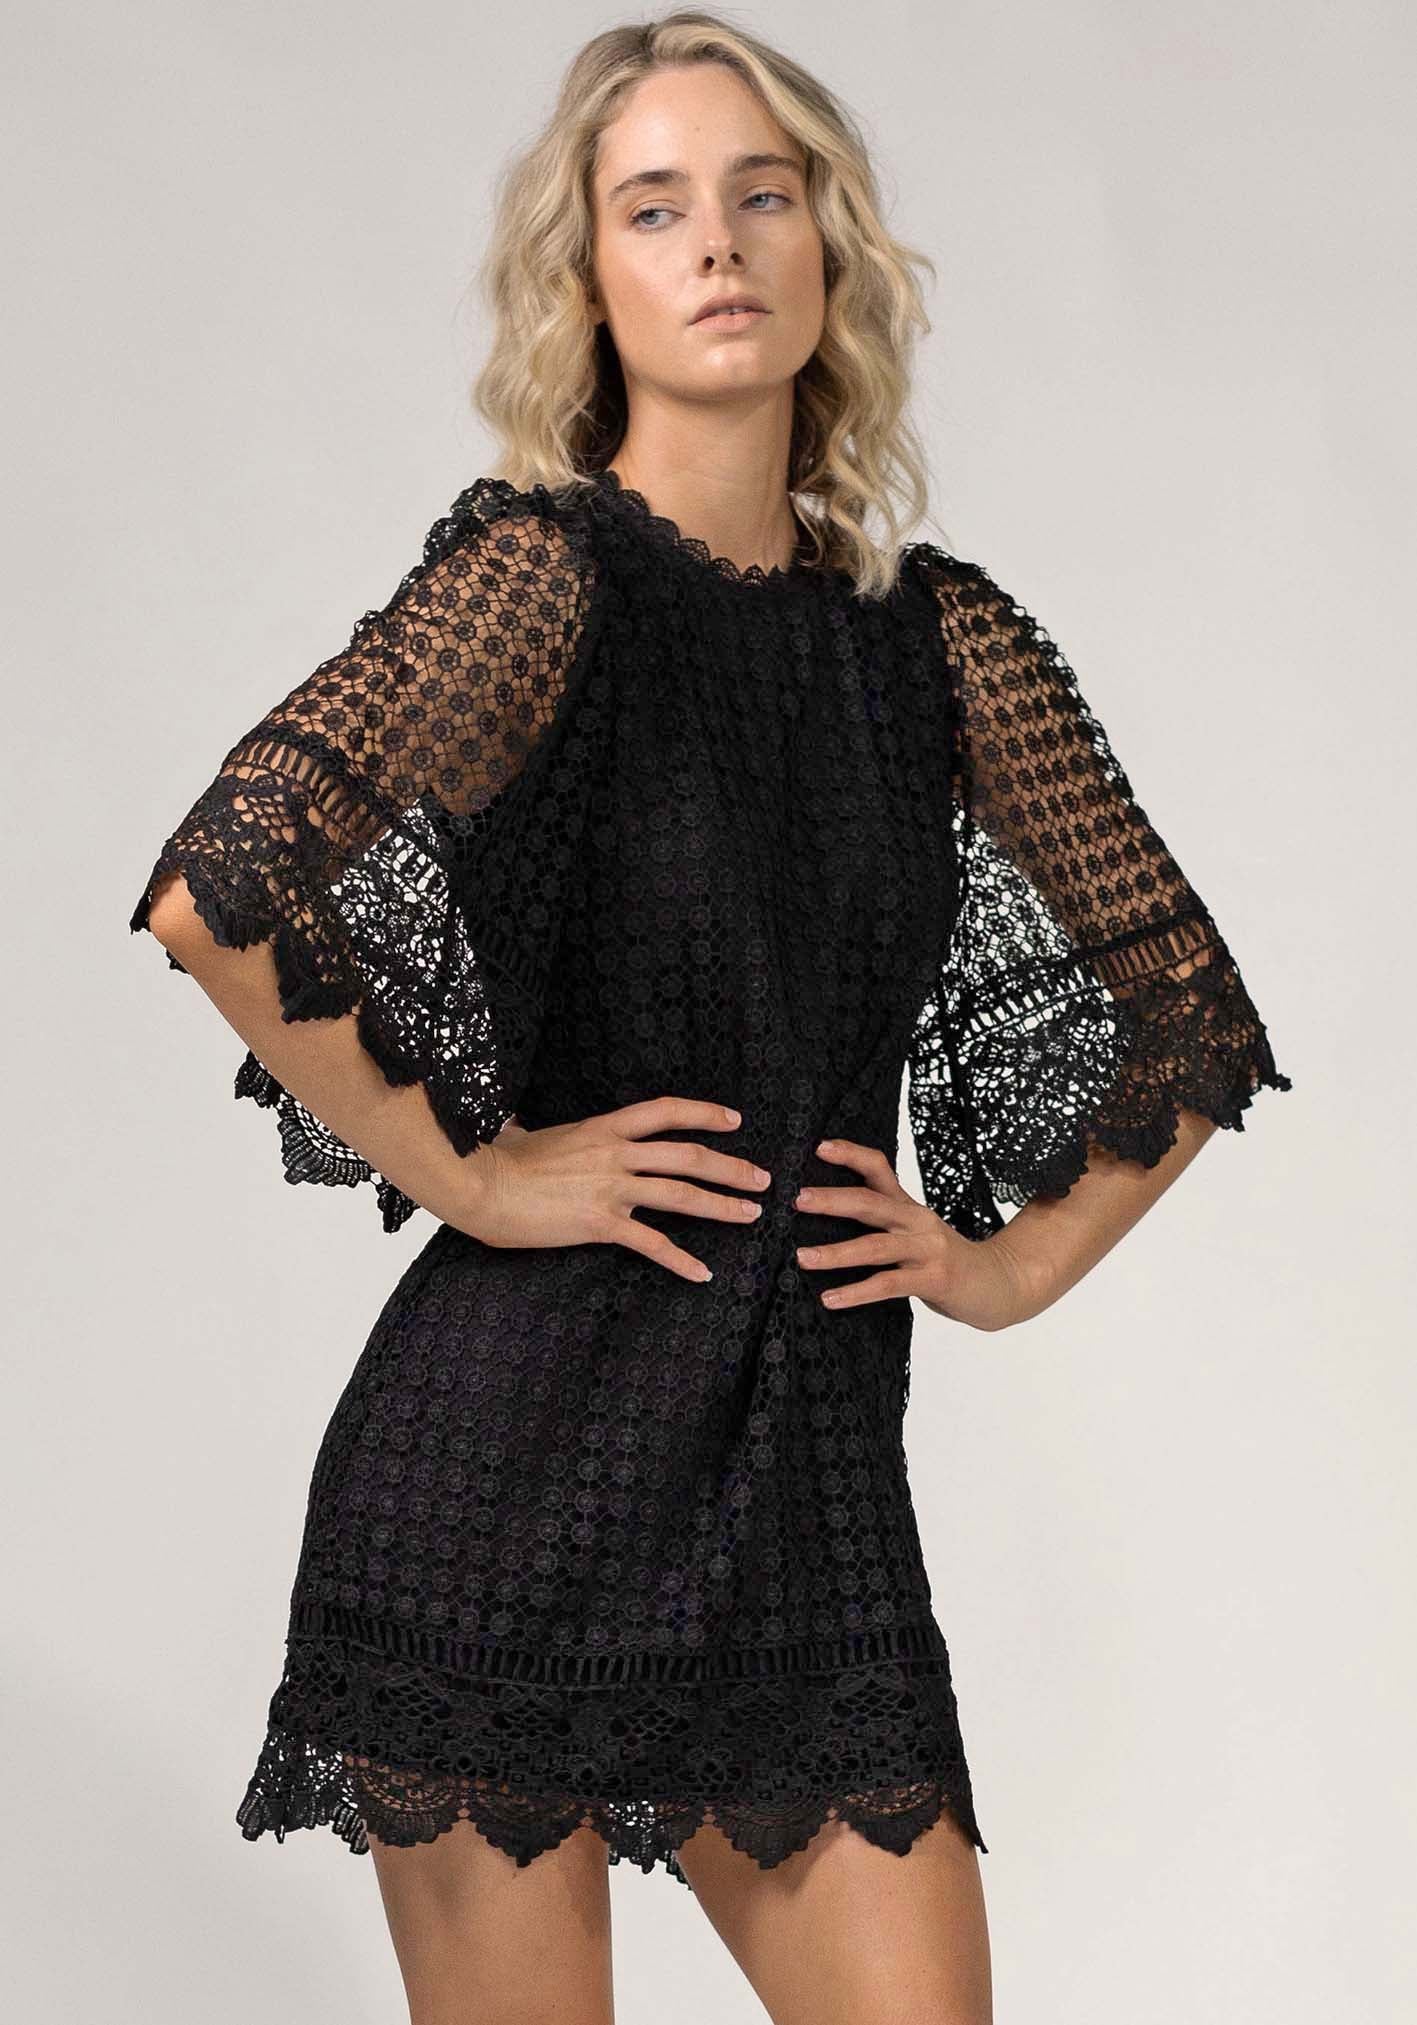 Moment by Moment Lace Dress | Black Lace Dress by Three of Something